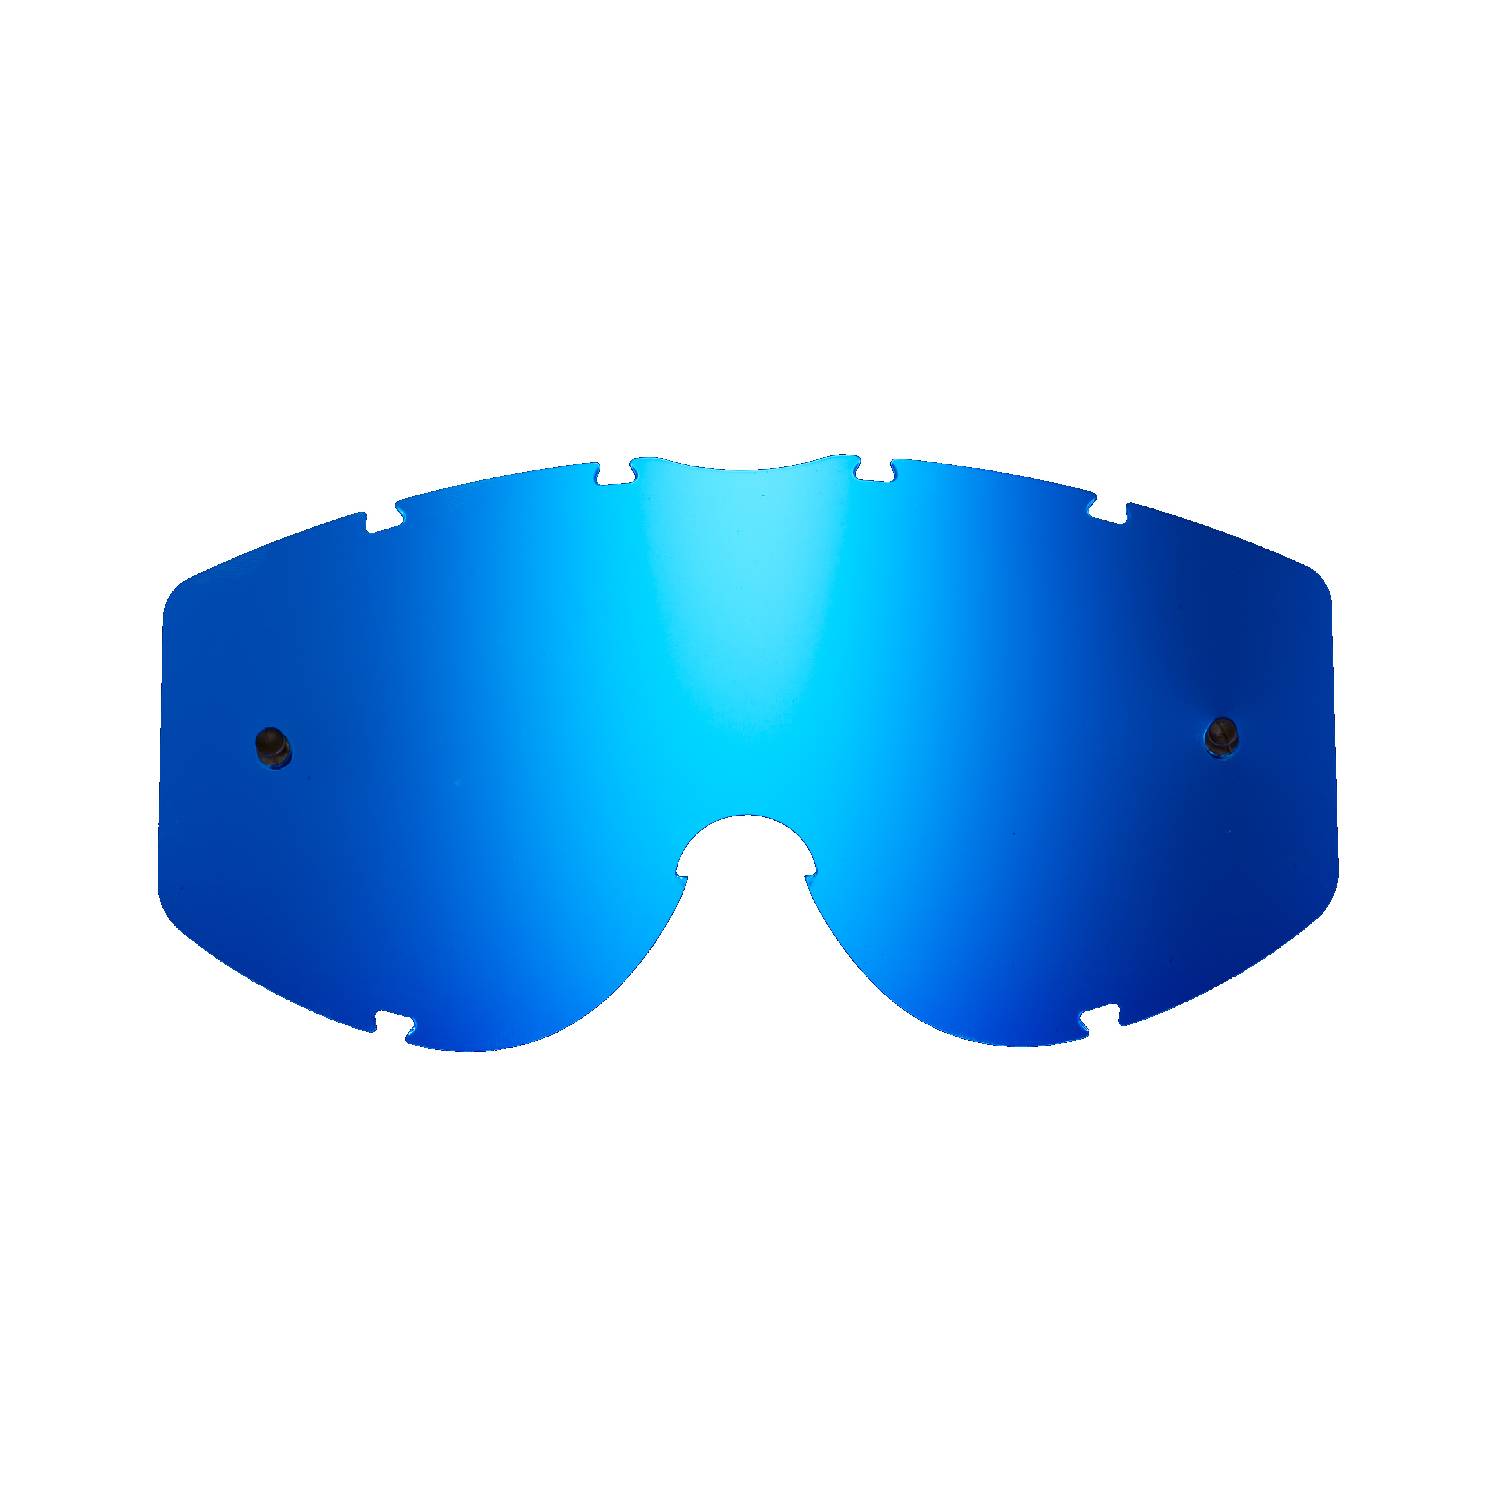 blue-toned mirrored replacement lenses for goggles compatible for Progrip 3200 / 3450 / 3400  / 3201 / 3204 / 3301 goggle